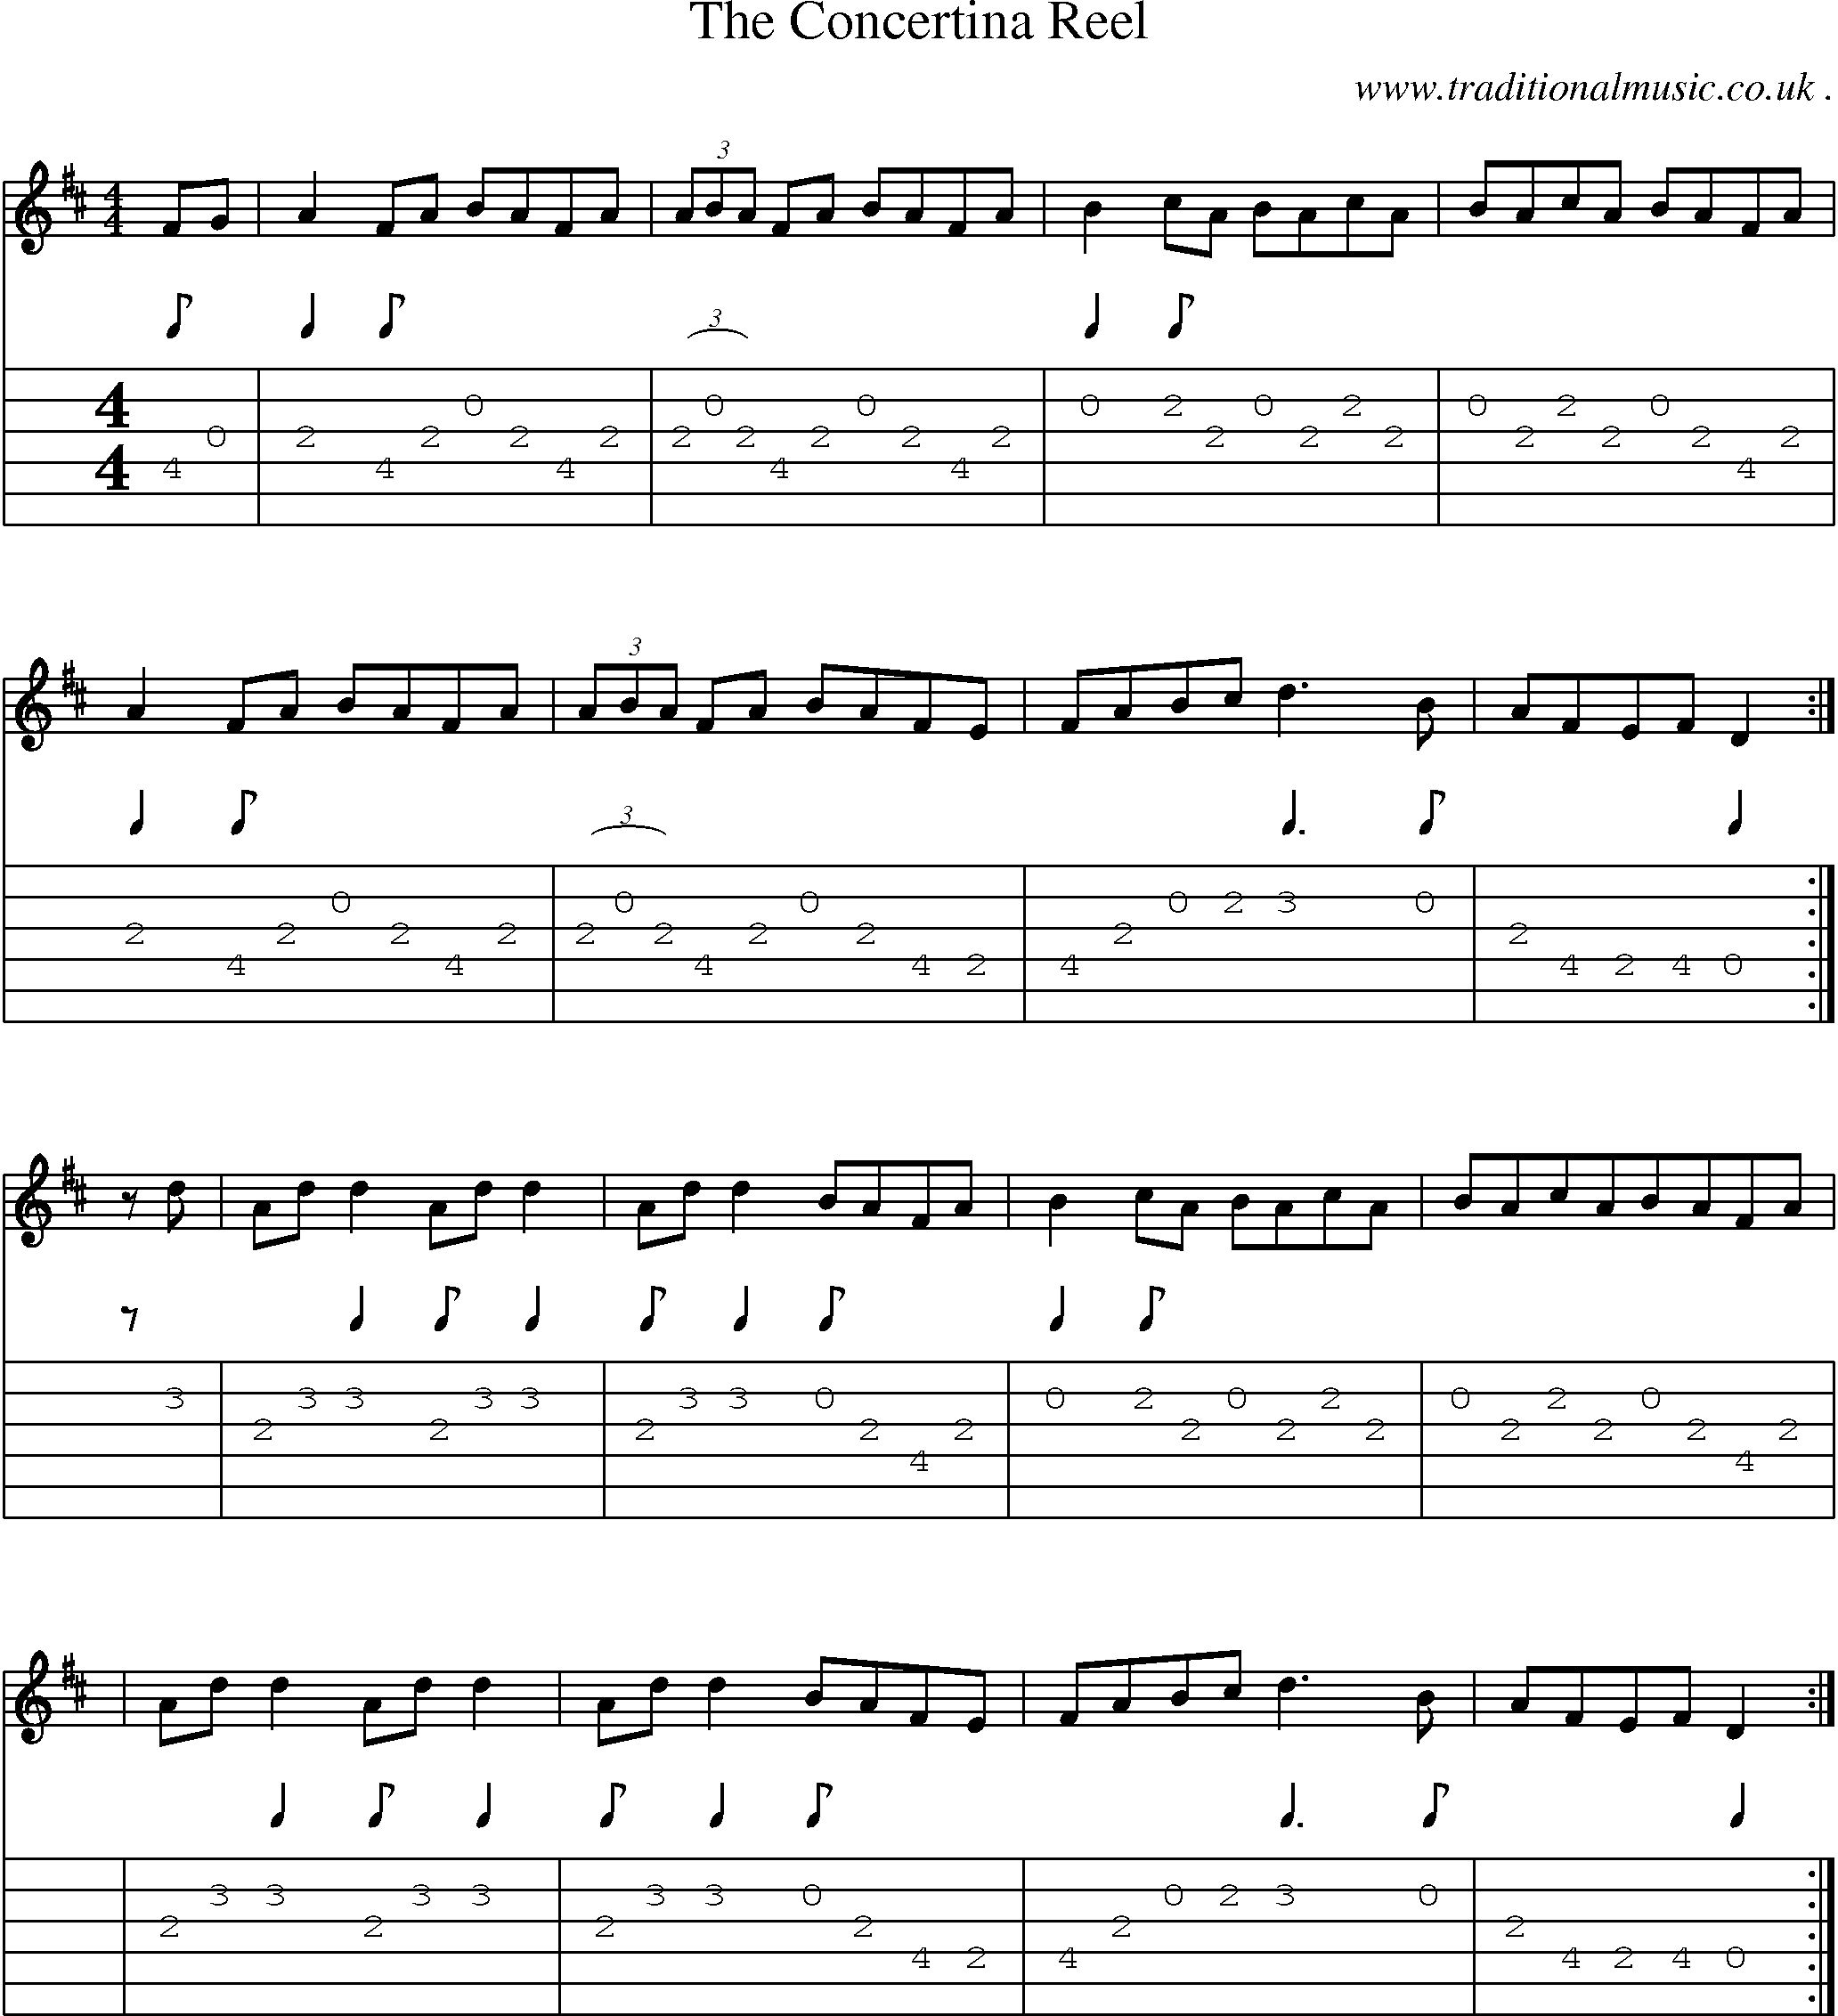 Sheet-Music and Guitar Tabs for The Concertina Reel